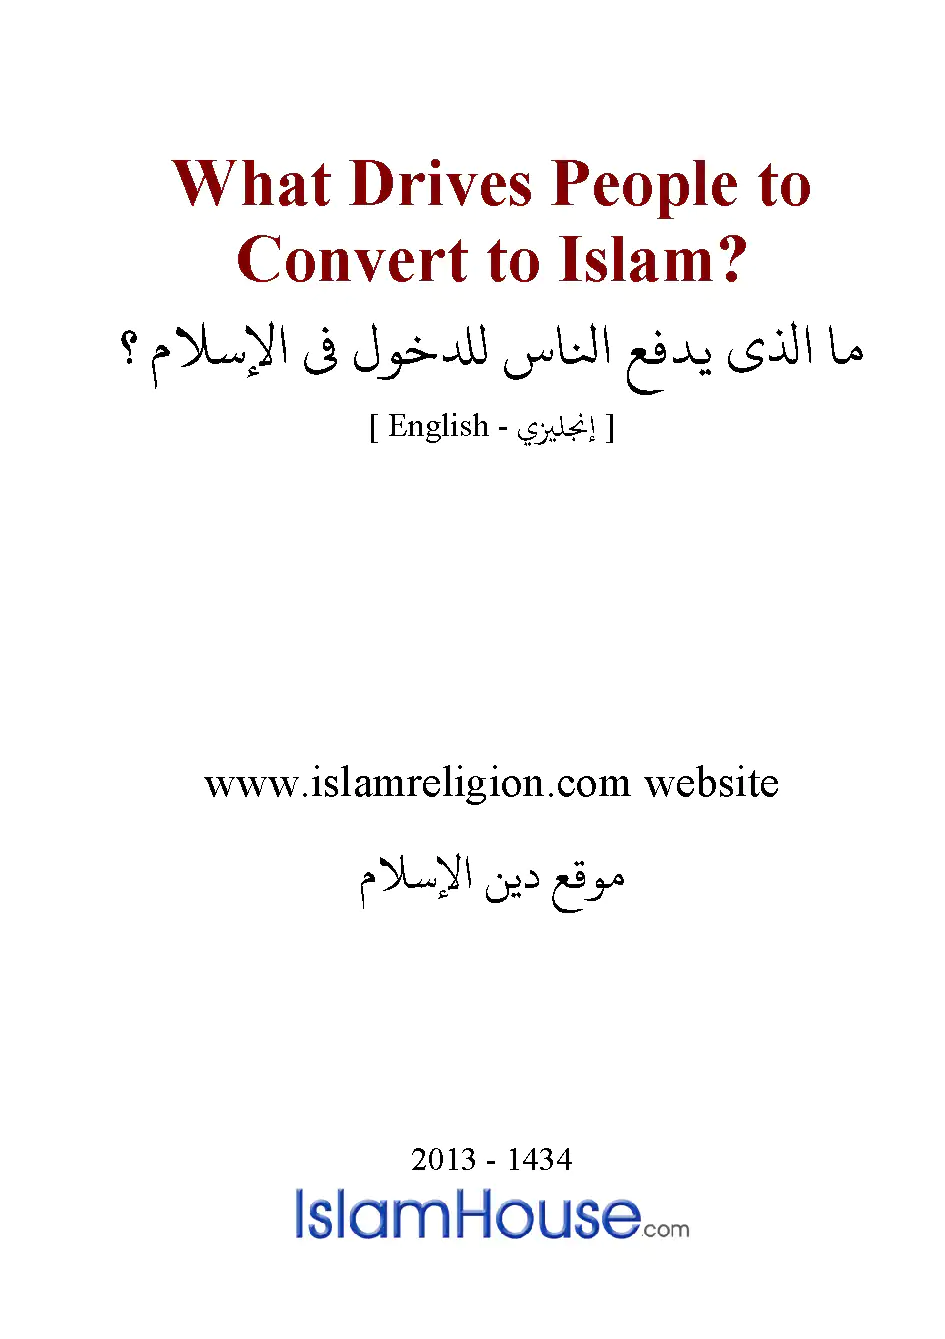 What Drives People to Convert to Islam?